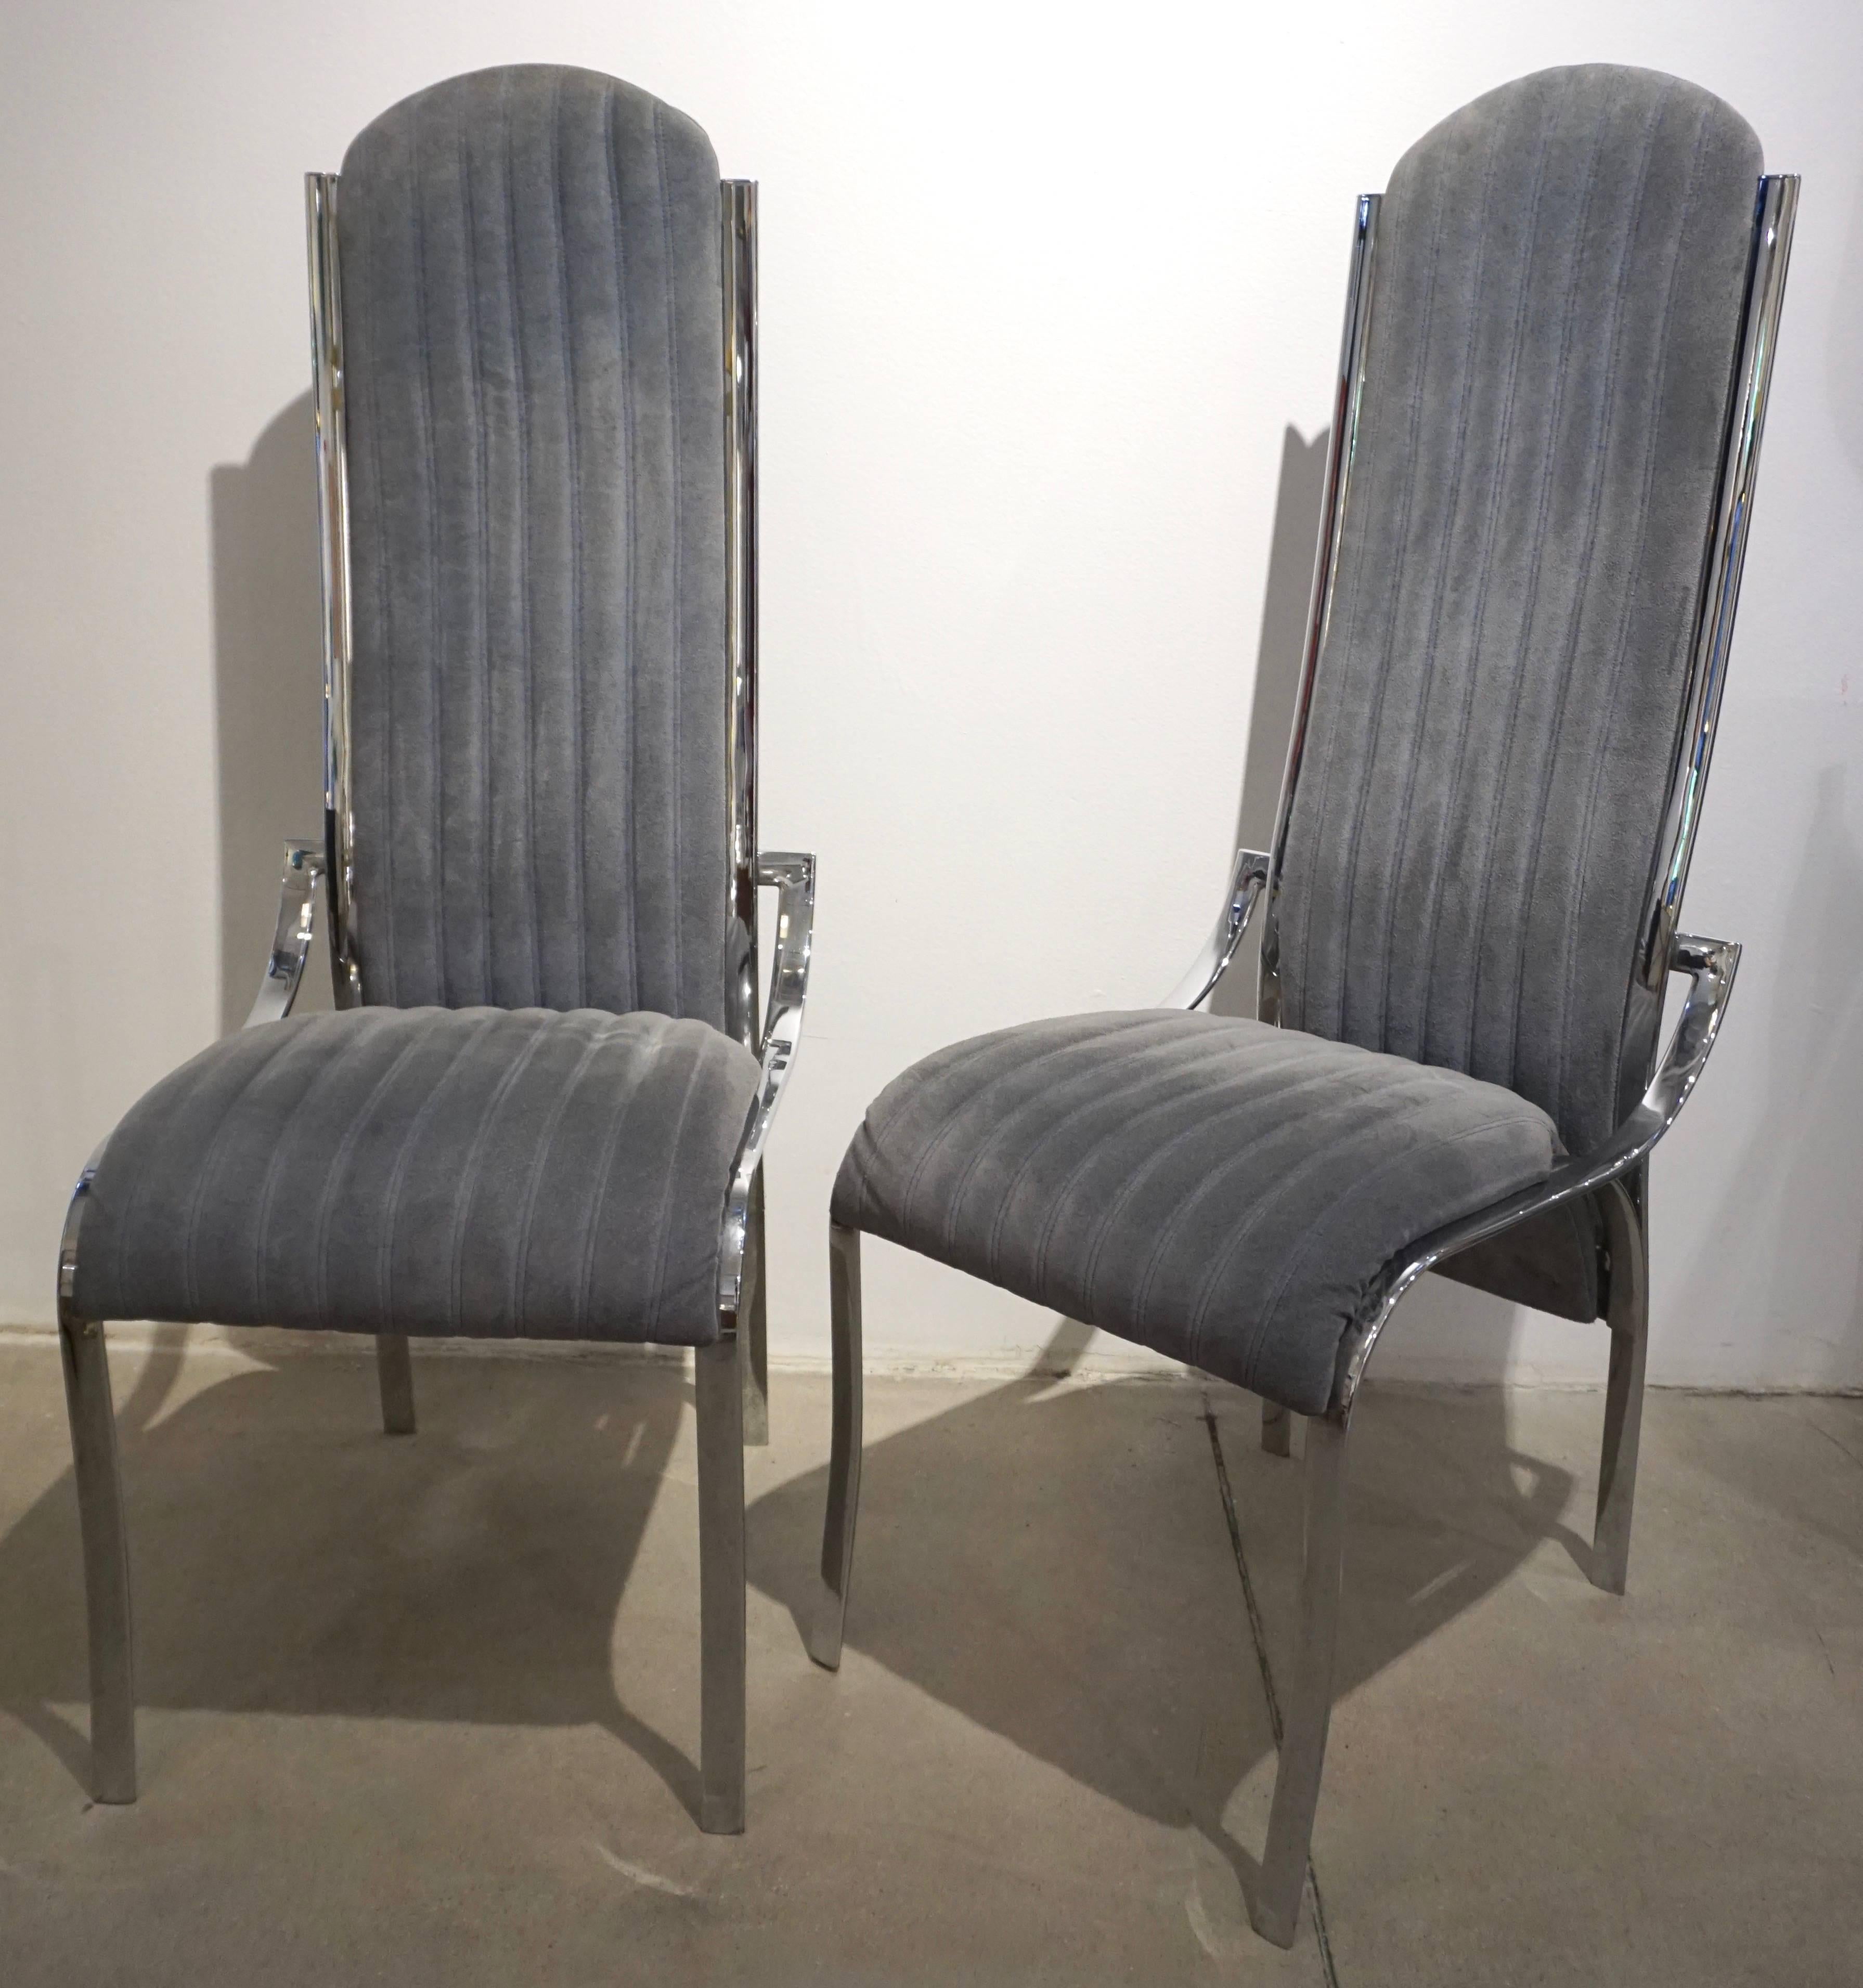 Italian Vintage Four Curved High Back Chrome Chairs in Blue Gray Stitch Fabric In Good Condition For Sale In New York, NY